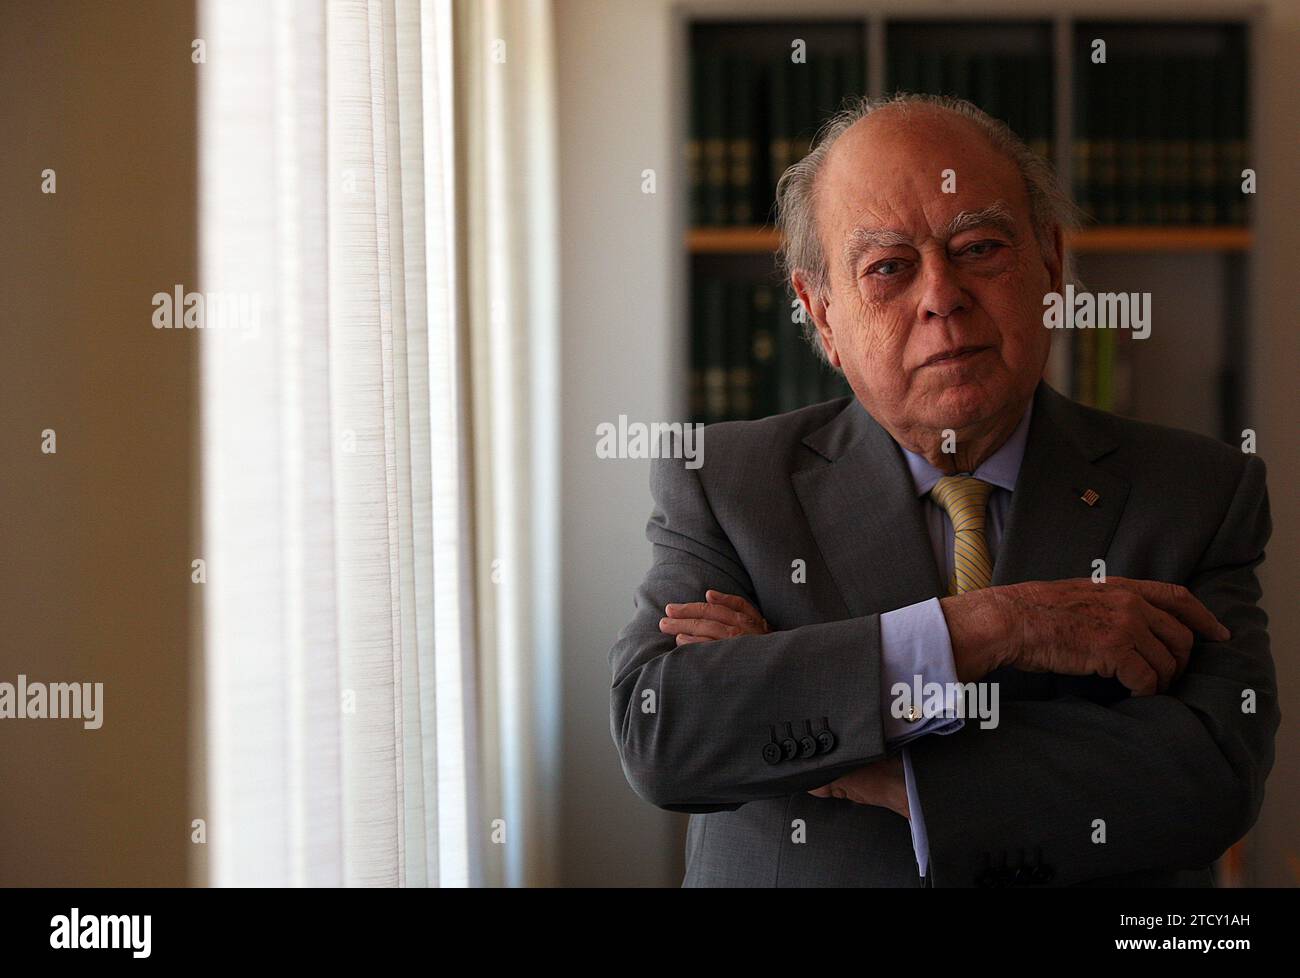 Barcelona...06/16/2010...Interview with the Former President of the Generalitat, Jordi Pujol....Photos Ines Baucells....Archdc. Credit: Album / Archivo ABC / INES BAUCELLS Stock Photo